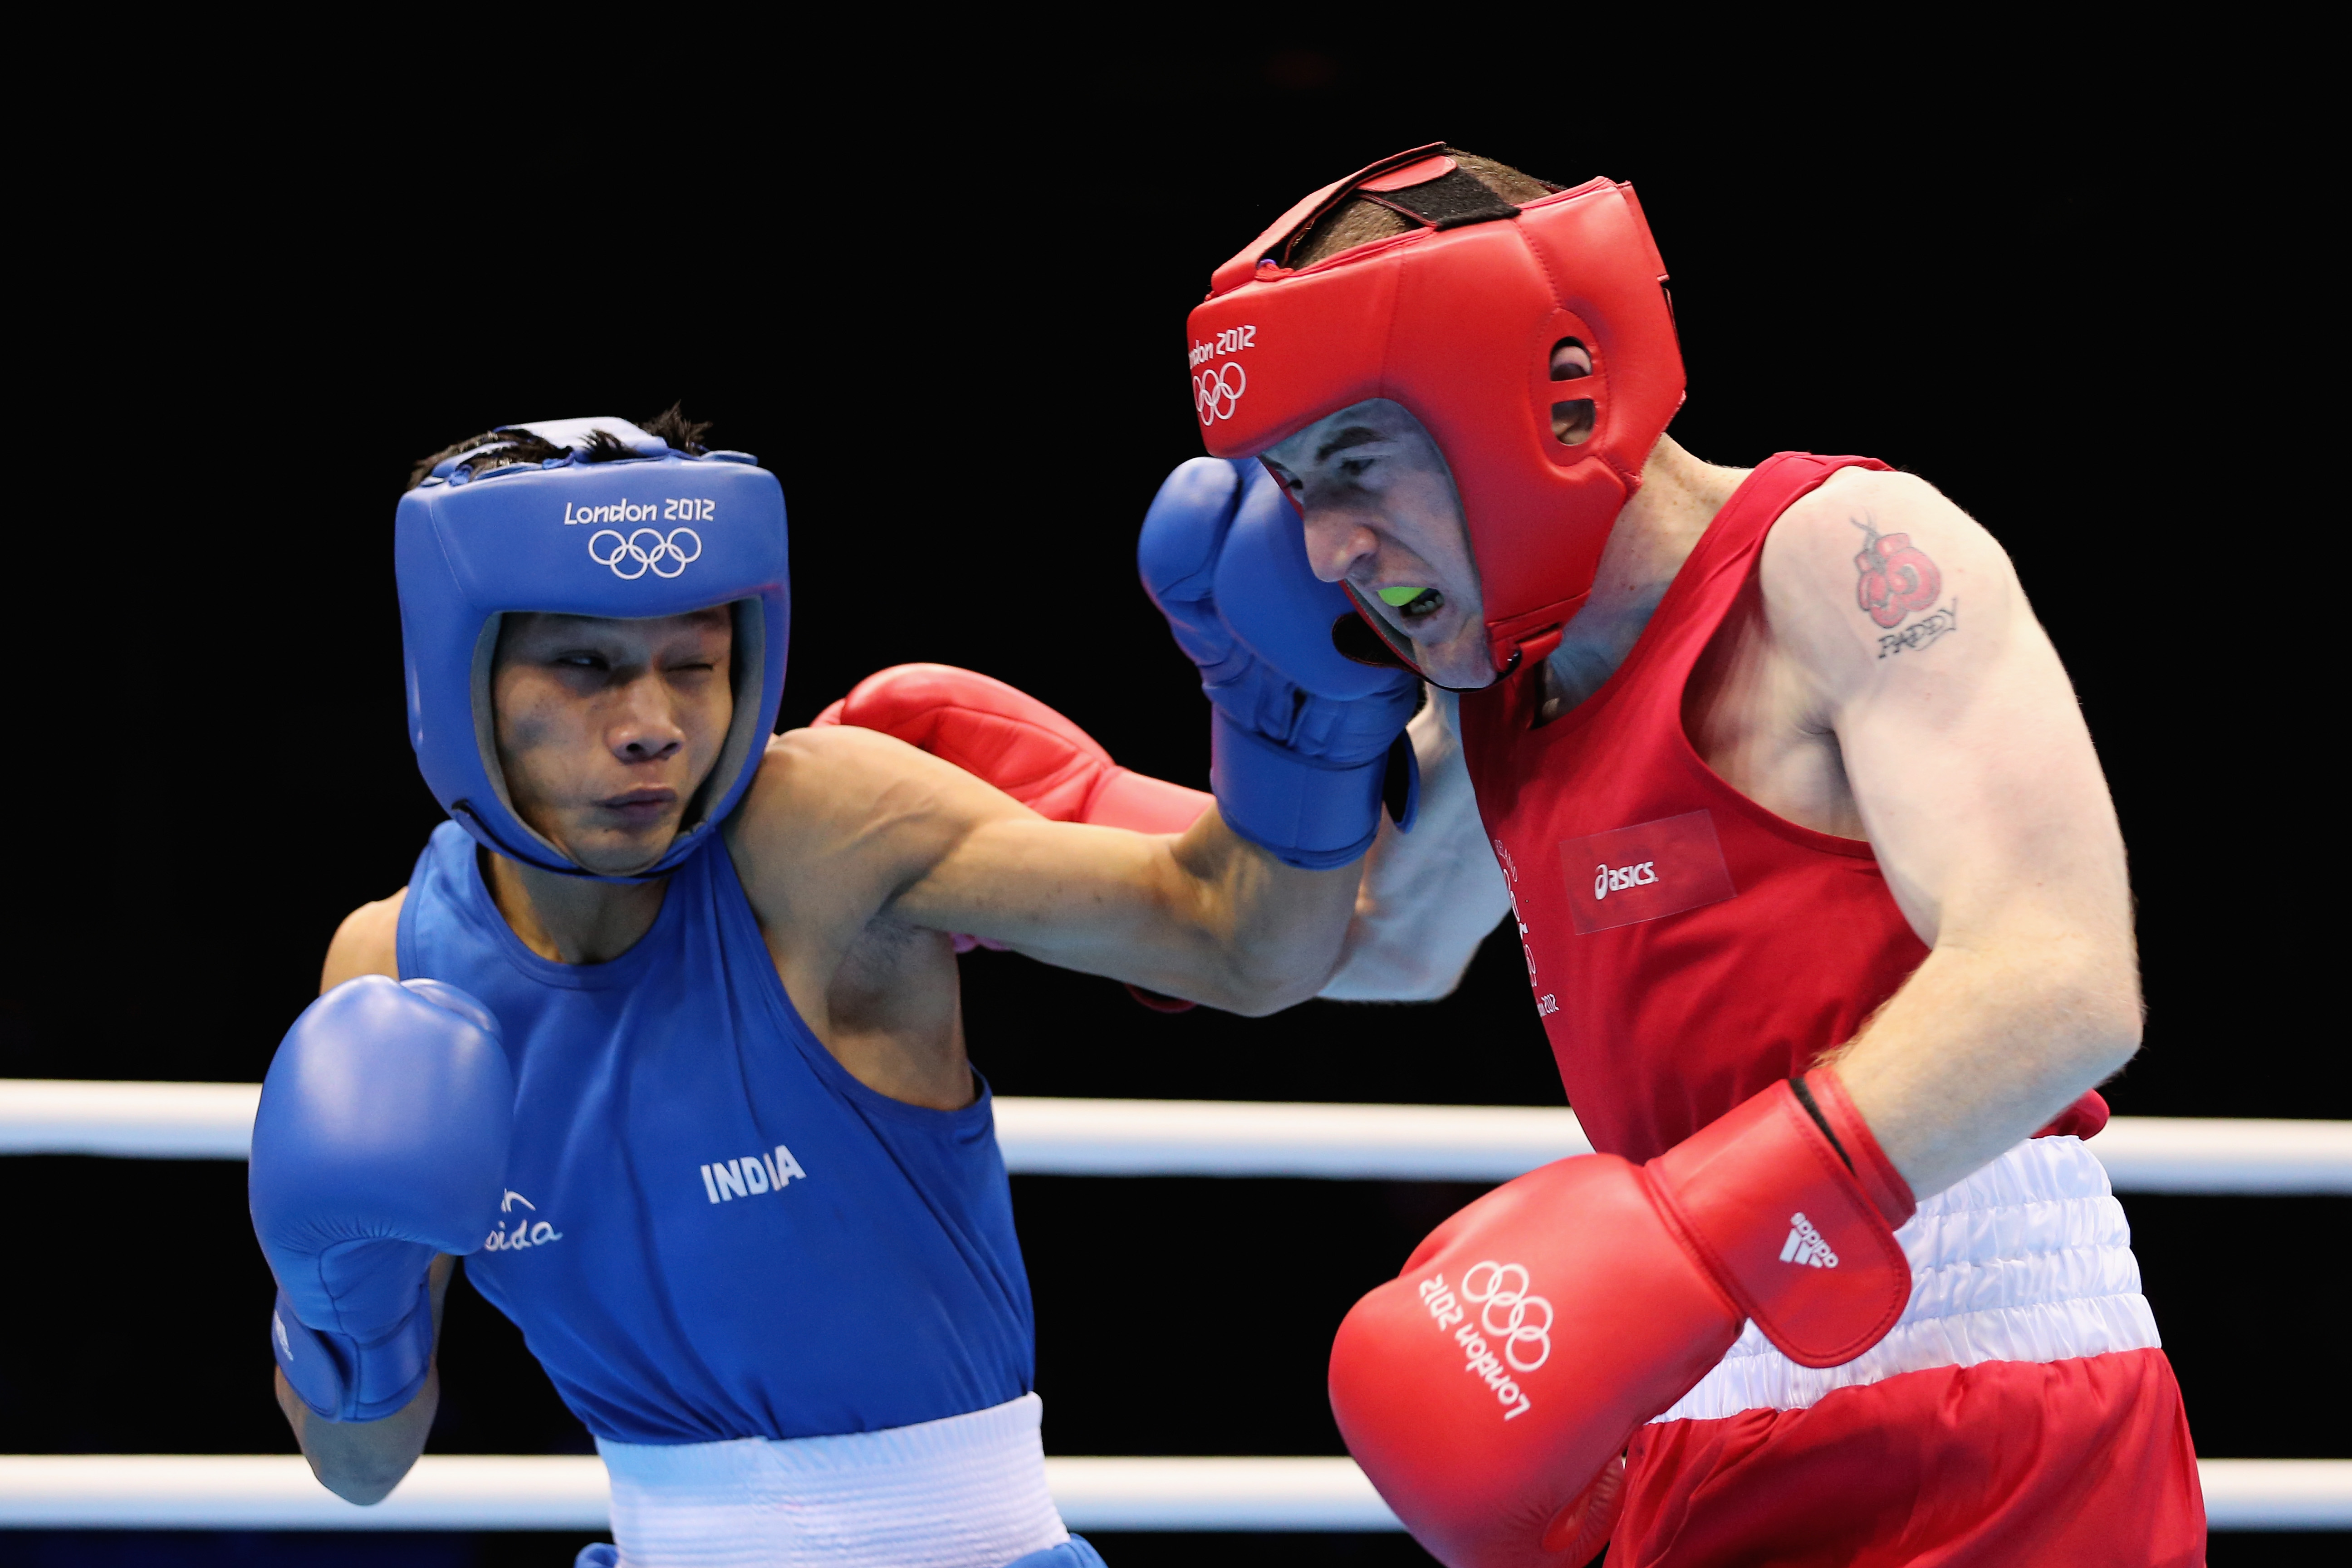 Fixing allegations against Boxing bouts at Rio Games